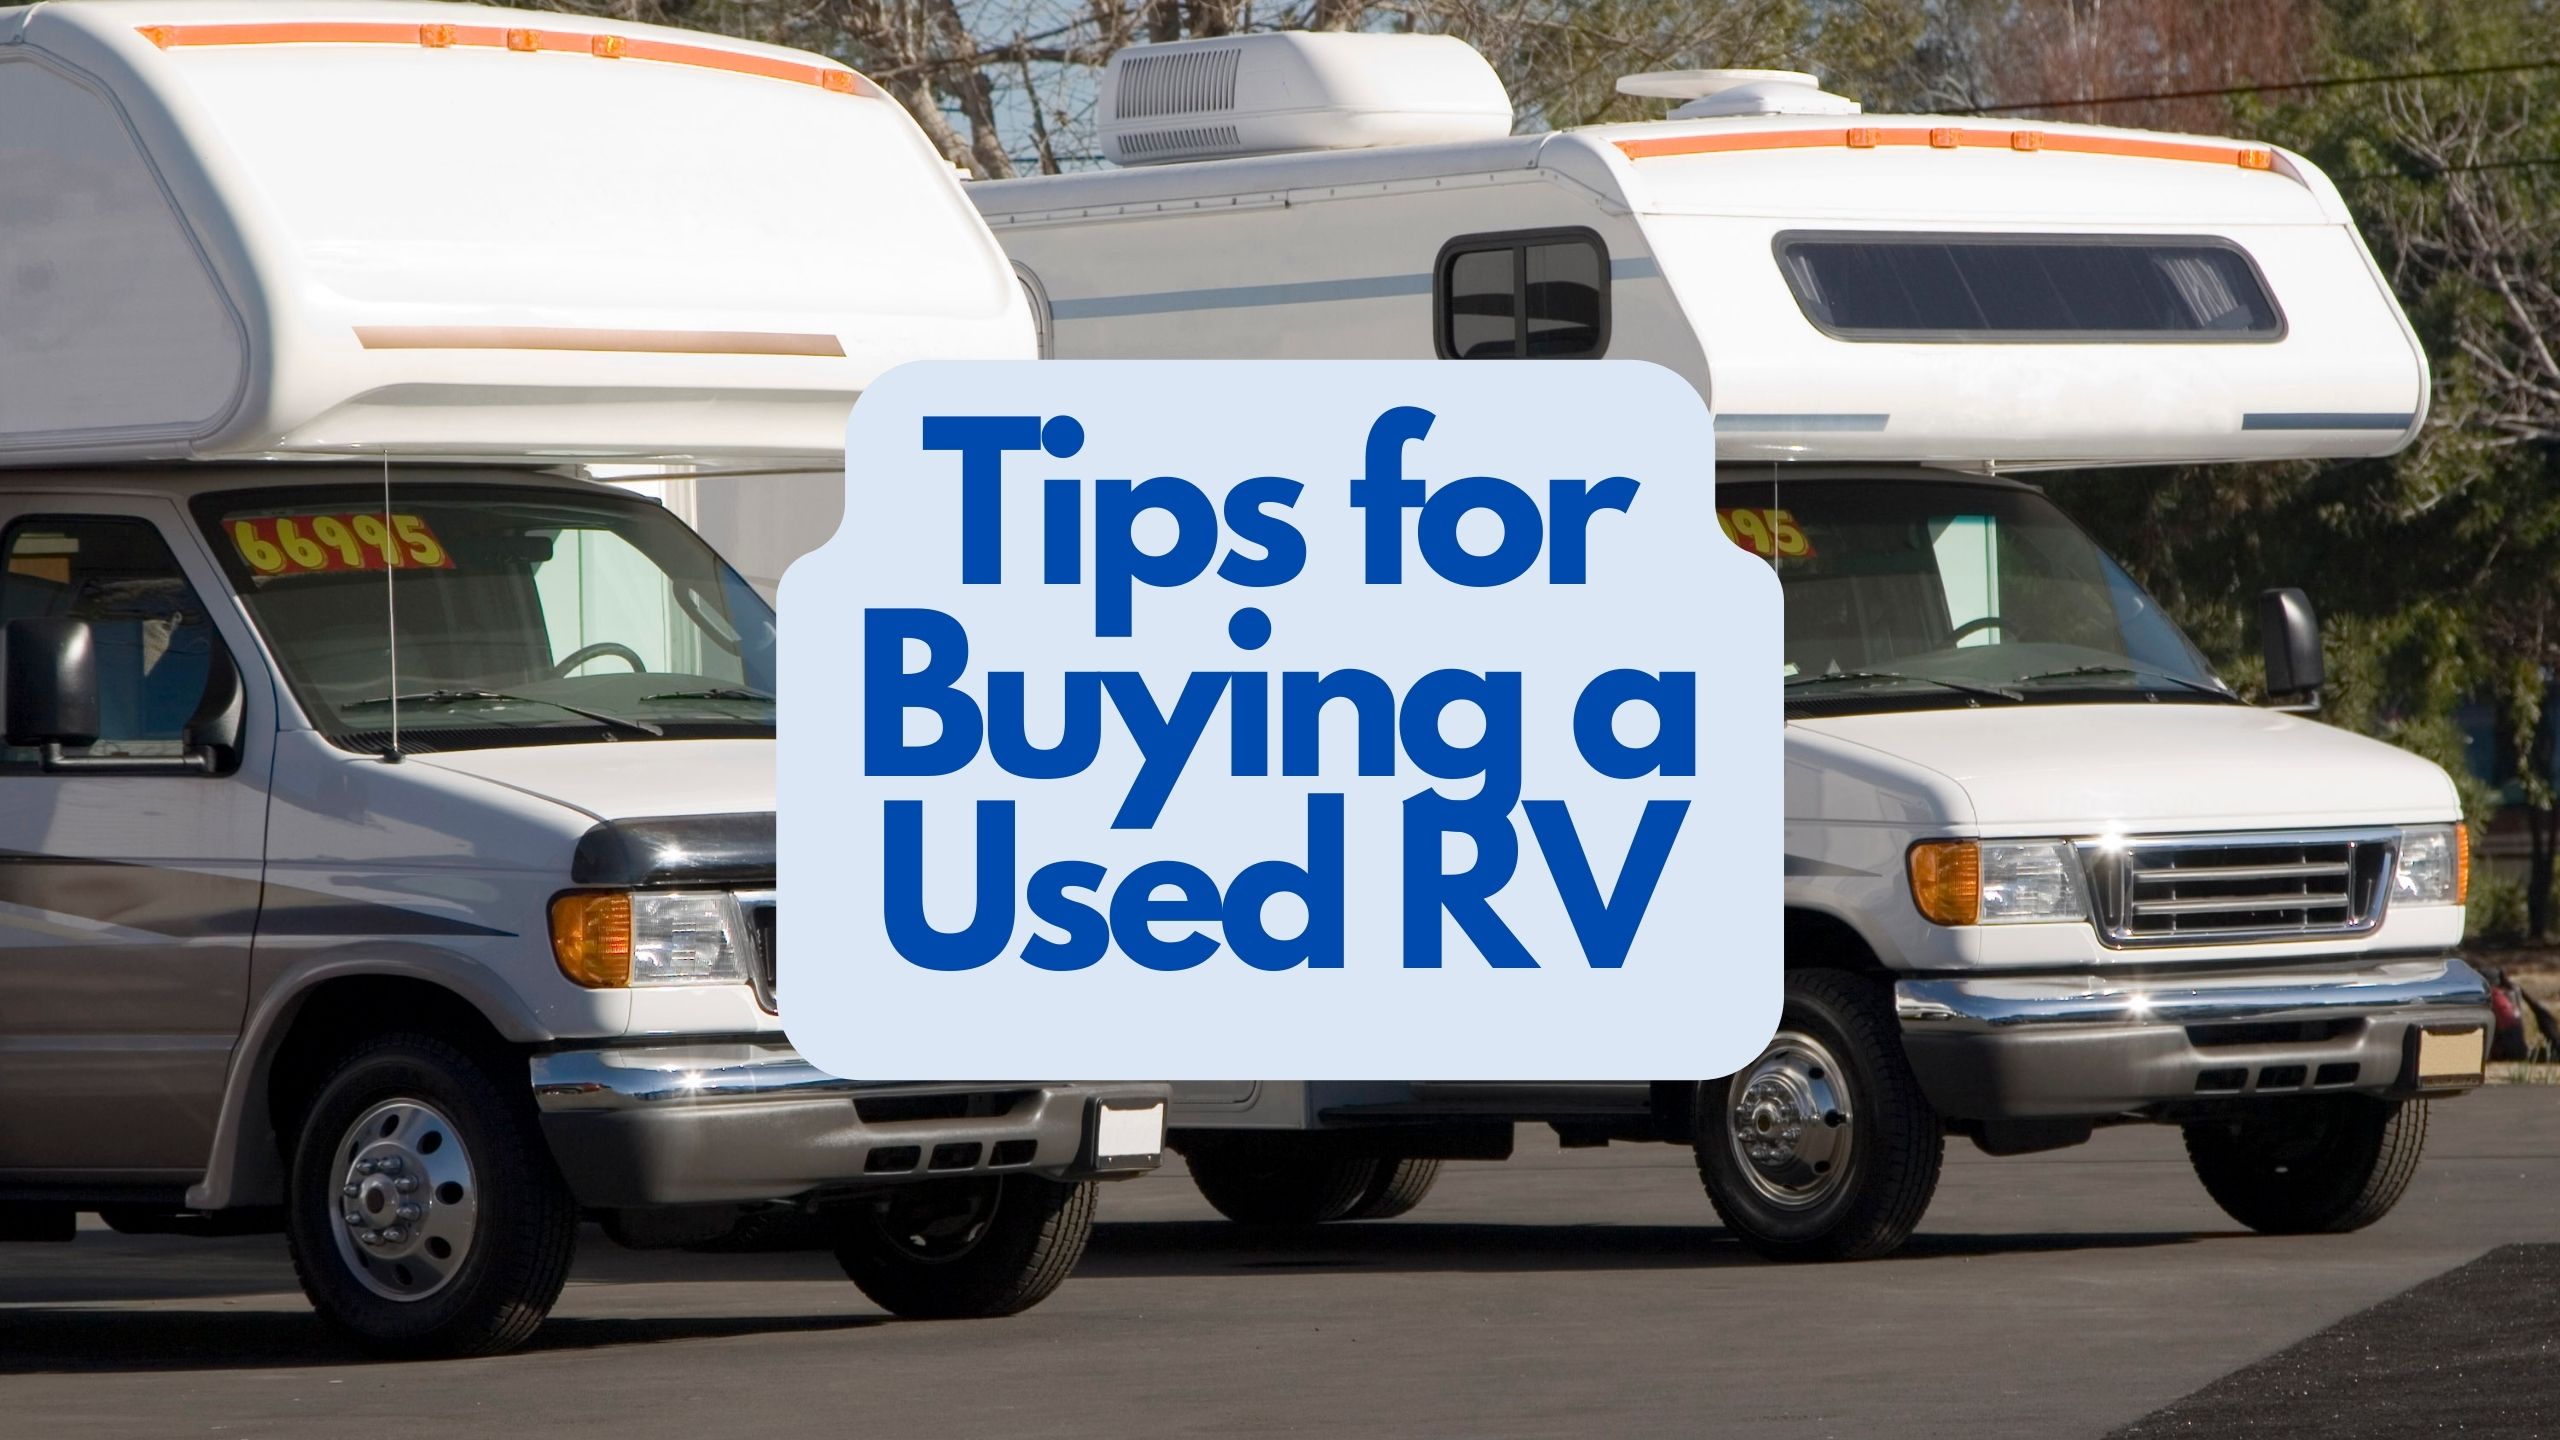 How to Buy the Best Used RV